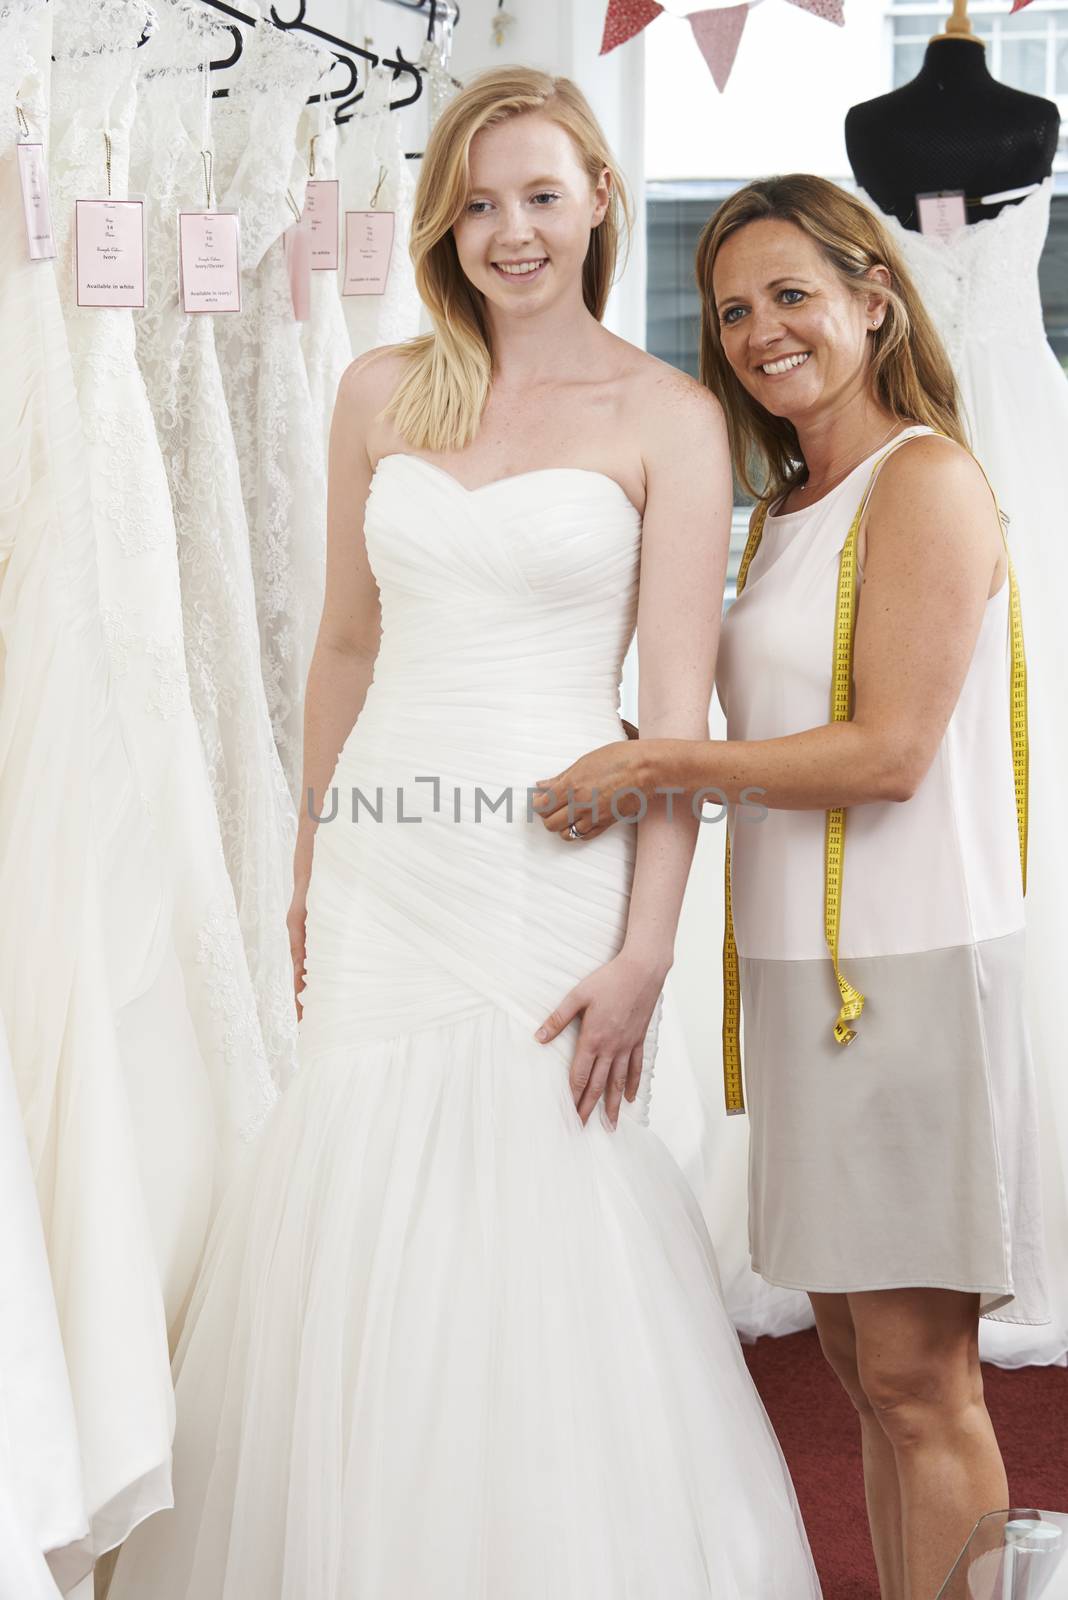 Bride Being Fitted For Wedding Dress By Store Owner